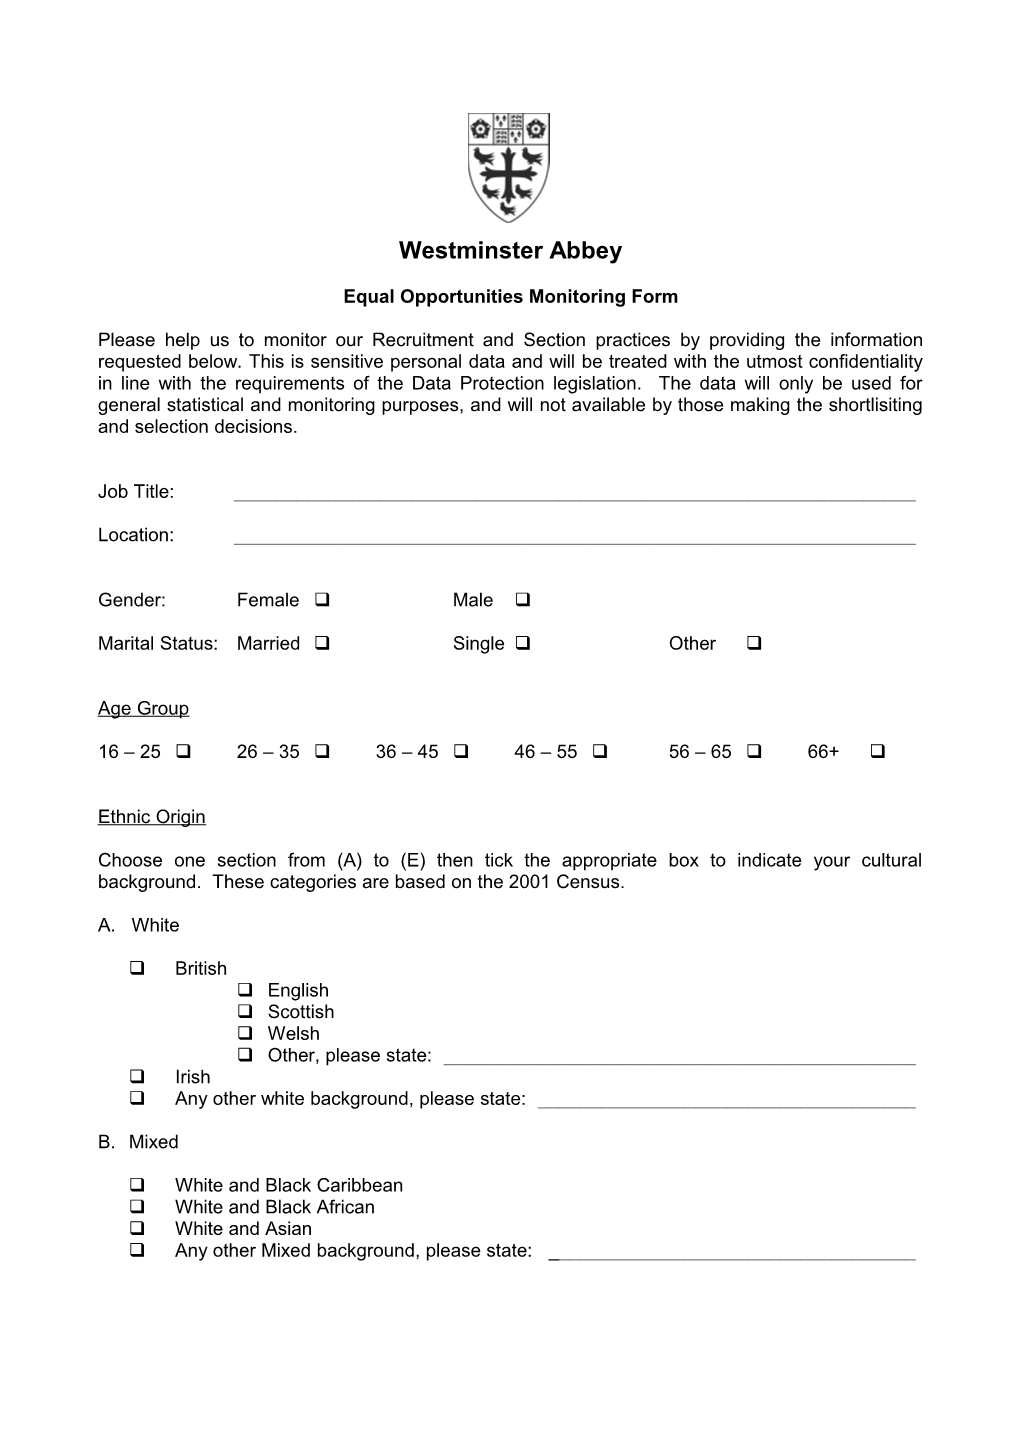 Equal Opportunities Monitoring Form s1